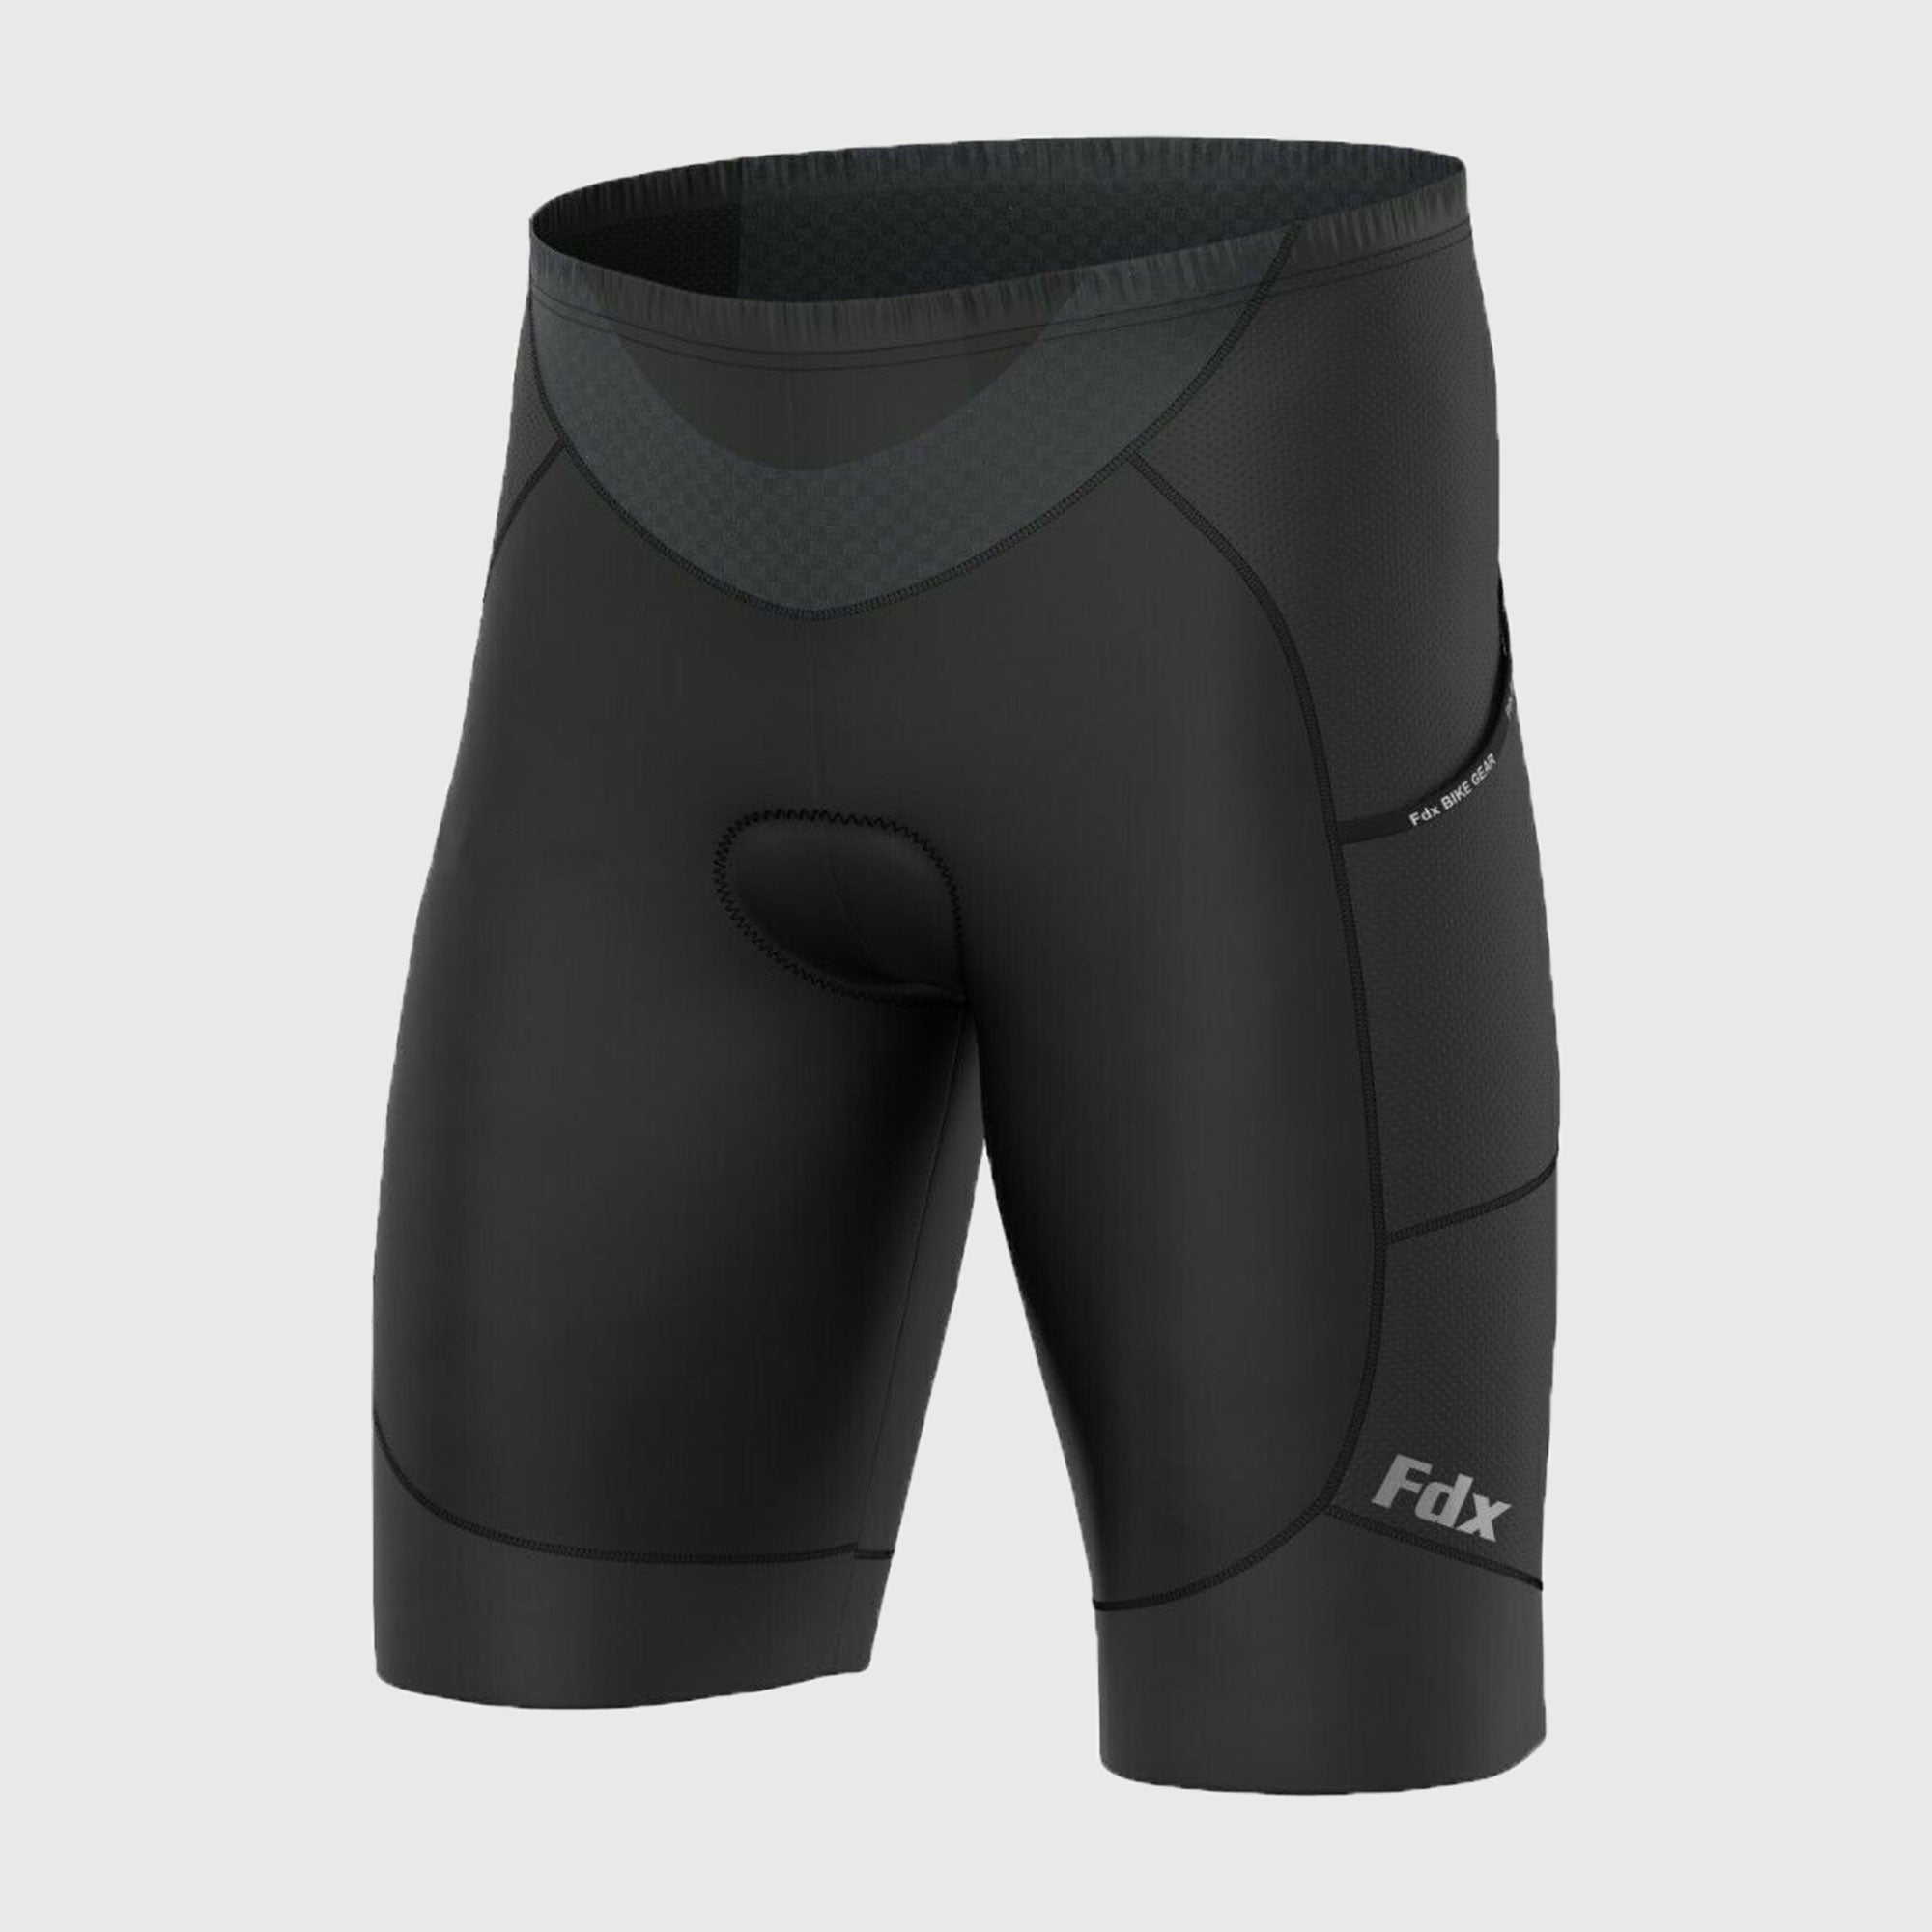 Fdx Essential Men's Padded Summer Cycling Shorts with Pockets Black